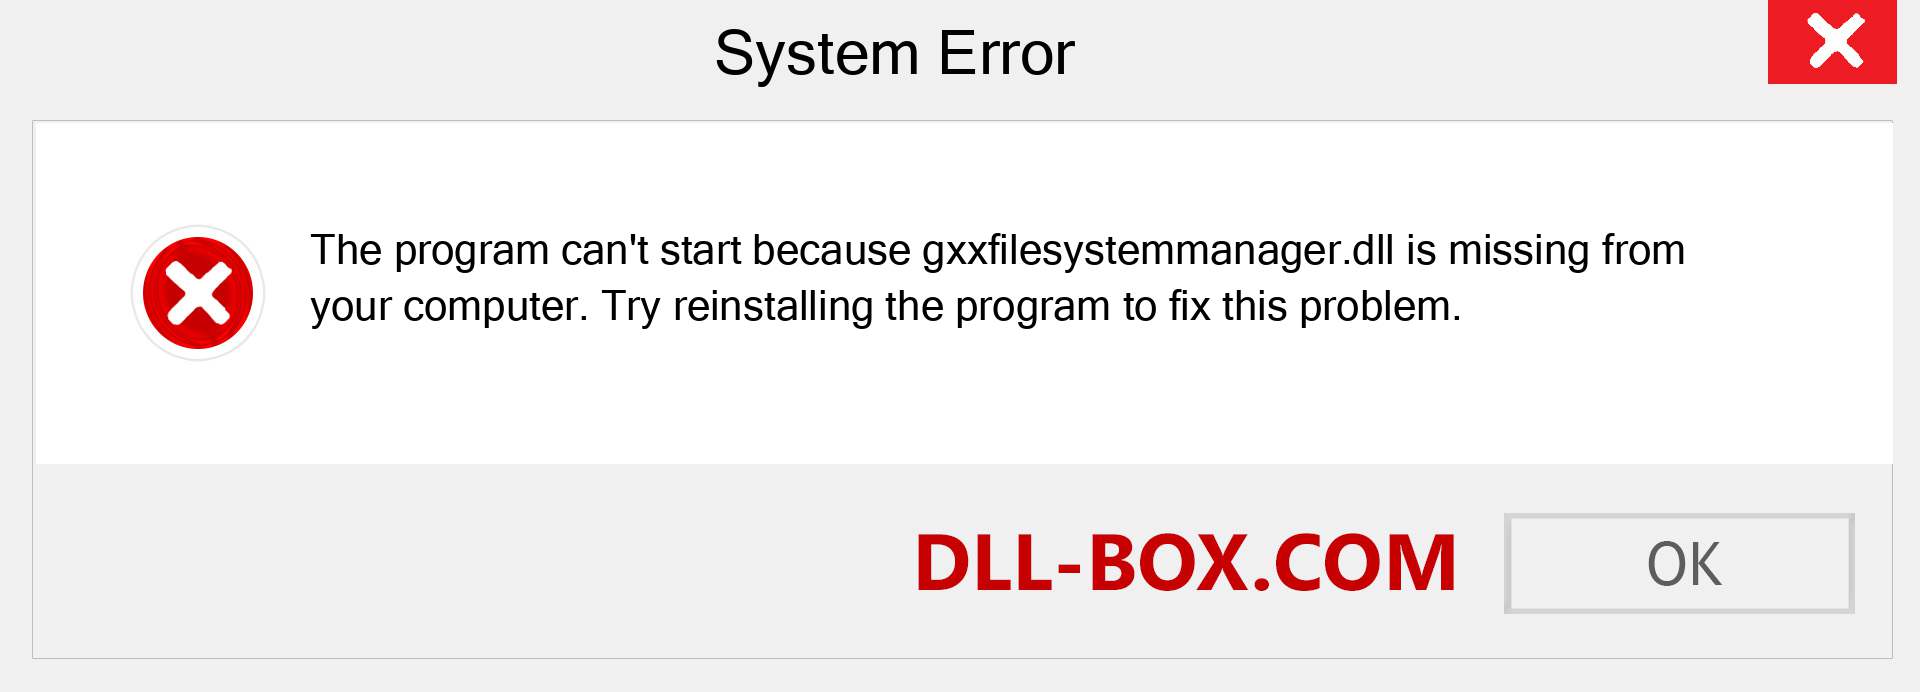  gxxfilesystemmanager.dll file is missing?. Download for Windows 7, 8, 10 - Fix  gxxfilesystemmanager dll Missing Error on Windows, photos, images